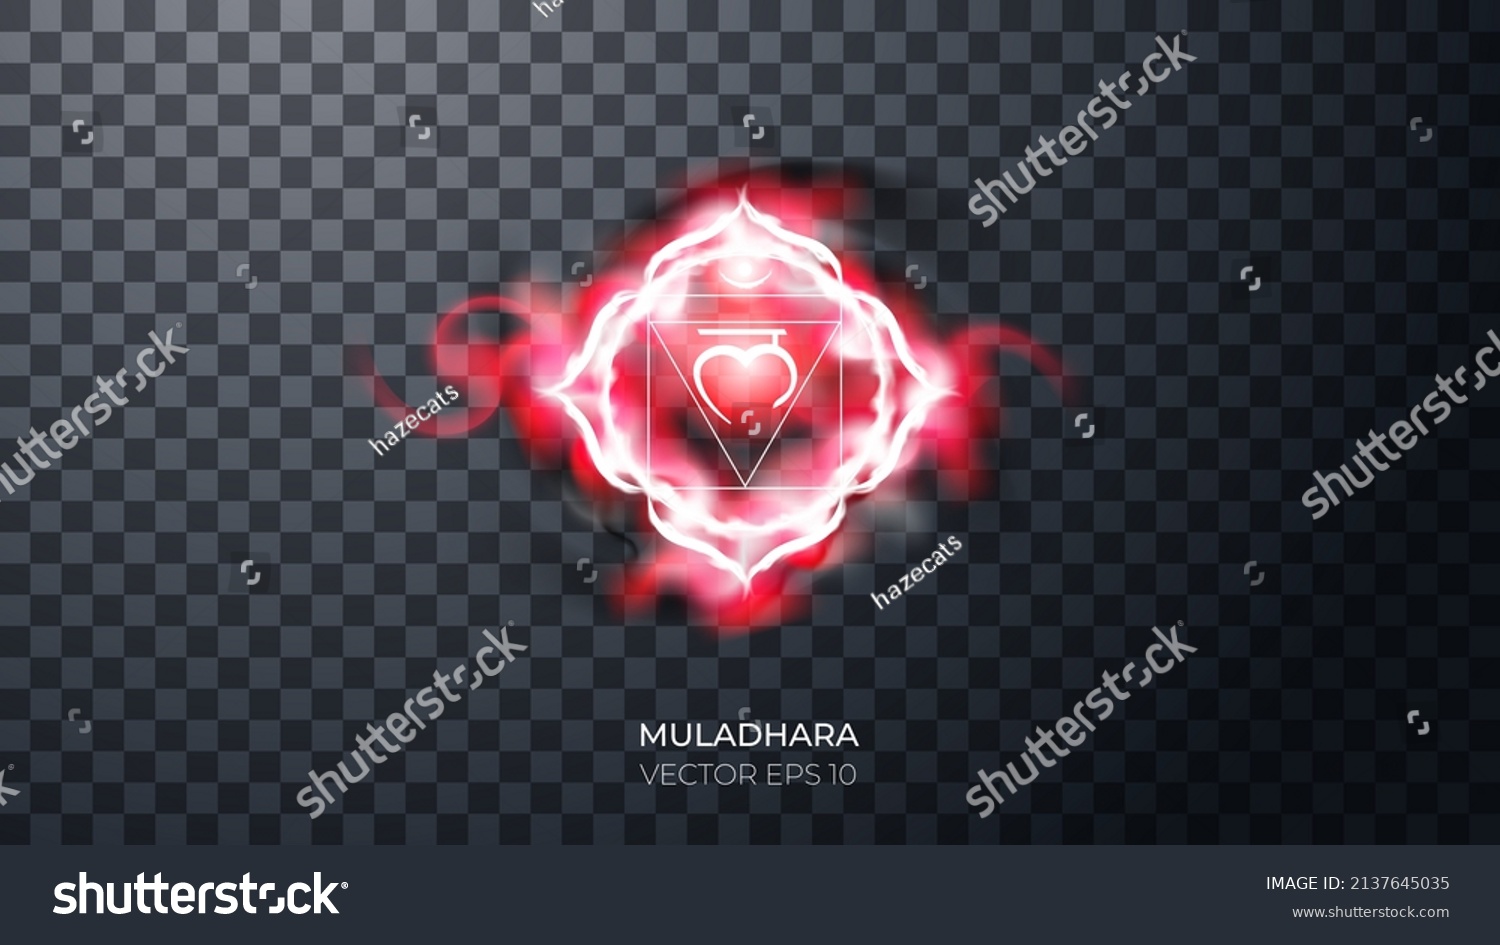 SVG of First, root chakra - Muladhara. Illustration of one of the seven chakras. Symbol of Hinduism, Buddhism. Ethereal strange fire sign. Decor elements for magic doctor, shaman, medium. svg